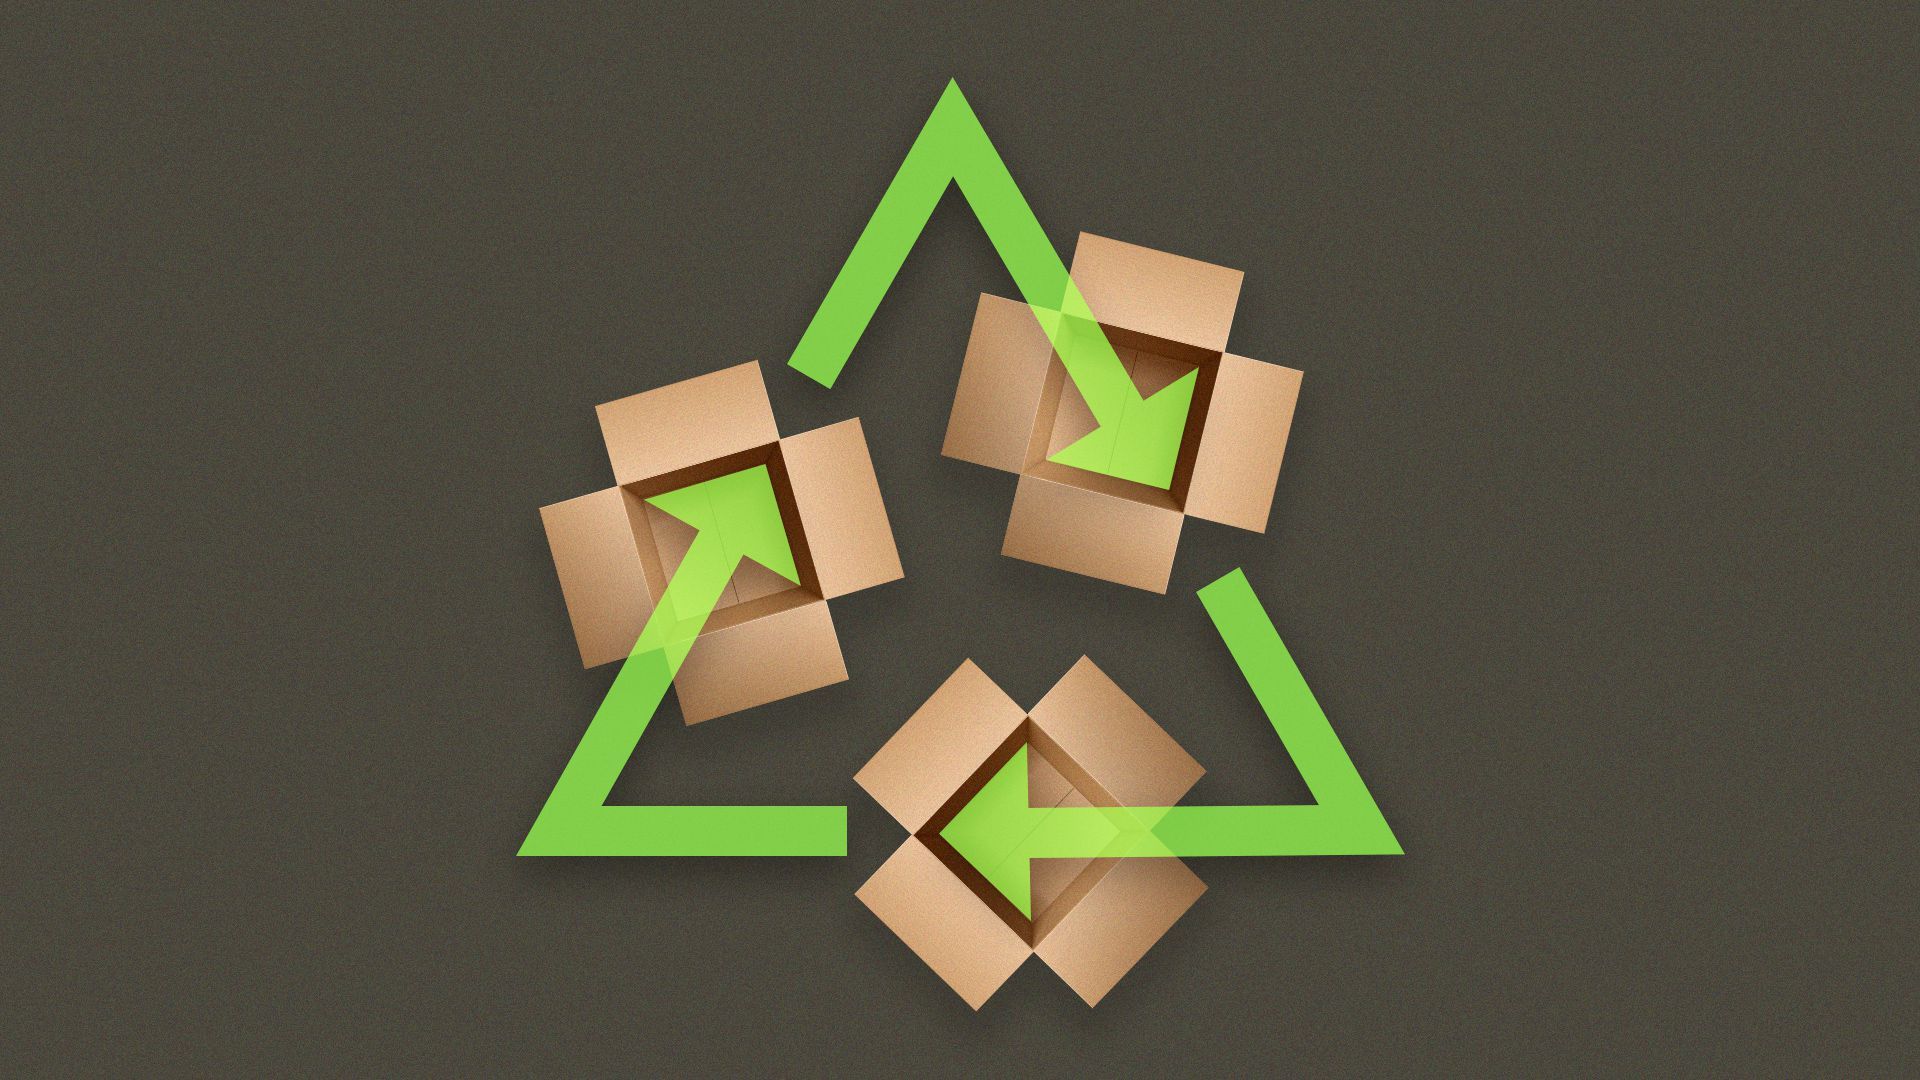 Illustration of three cardboard boxes forming the arrowheads on a recycle symbol.